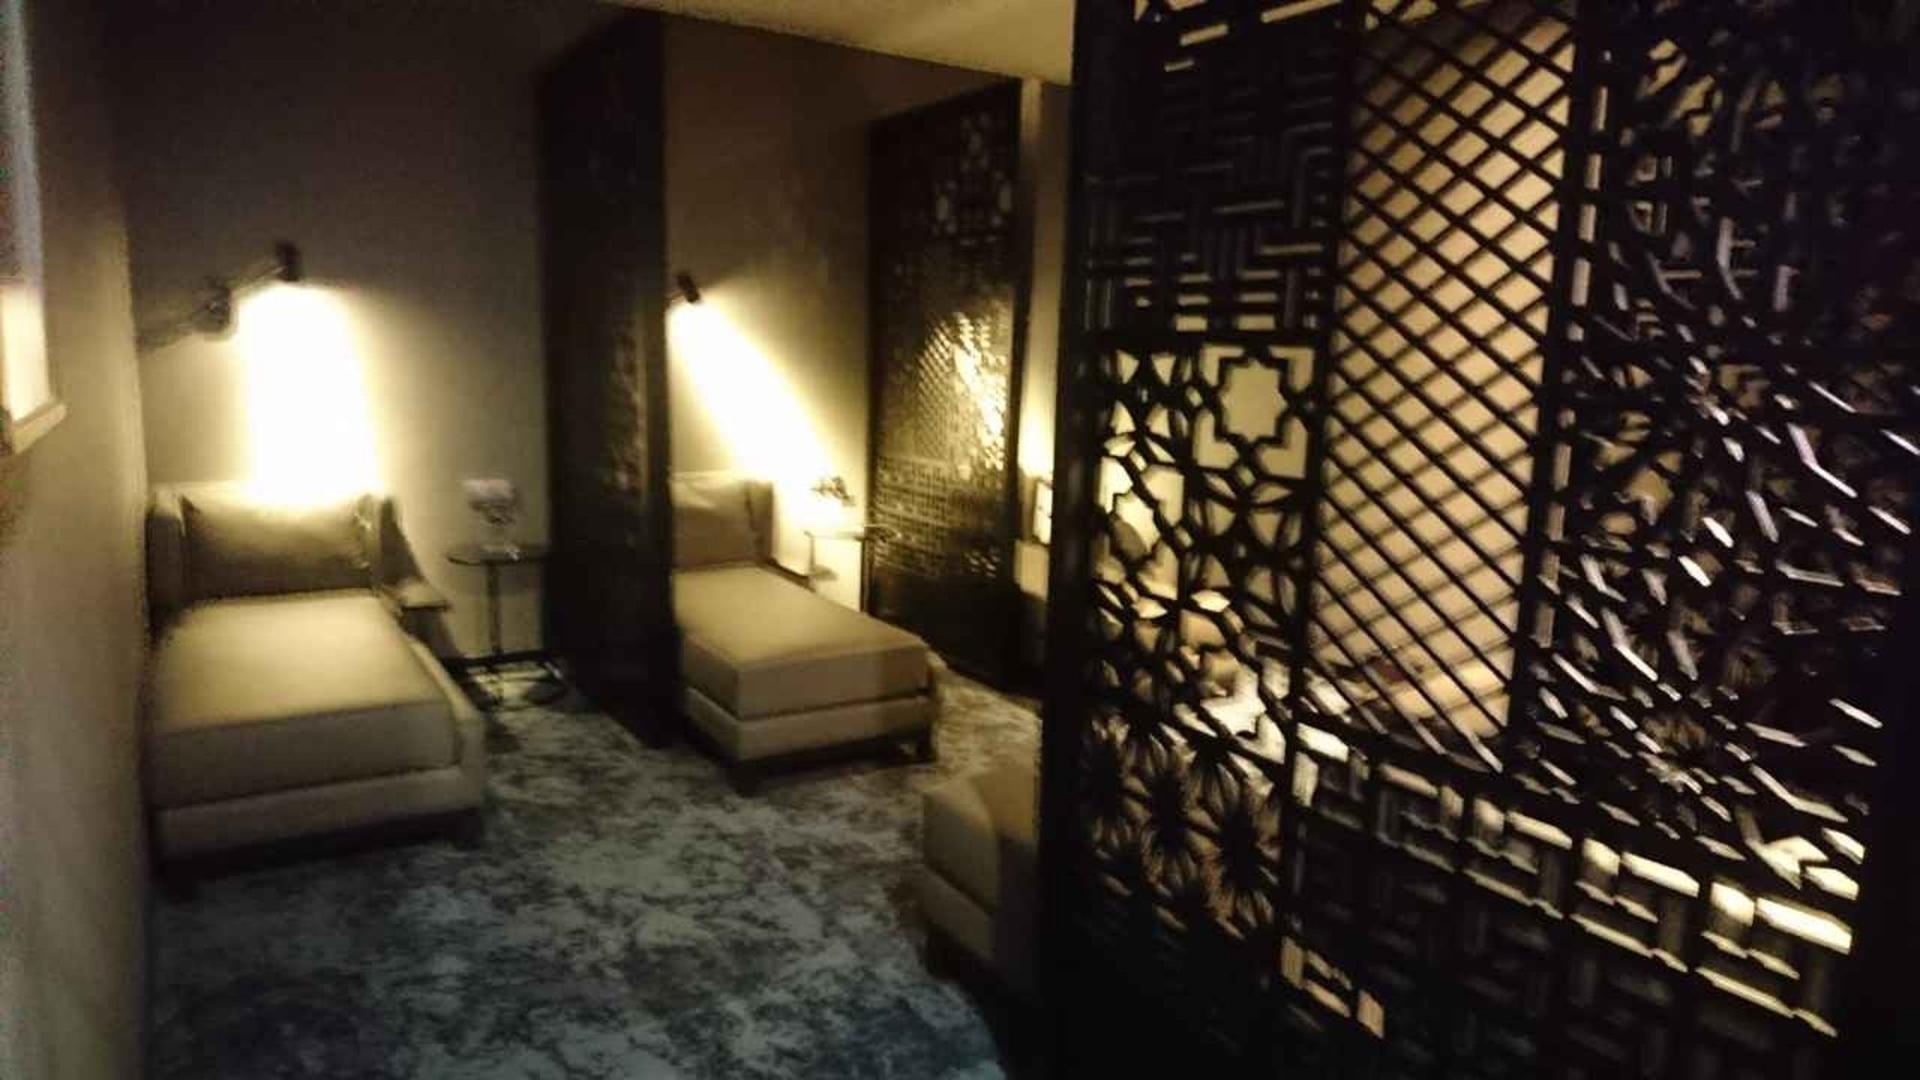 Malaysia Airlines Platinum Lounge image 2 of 26